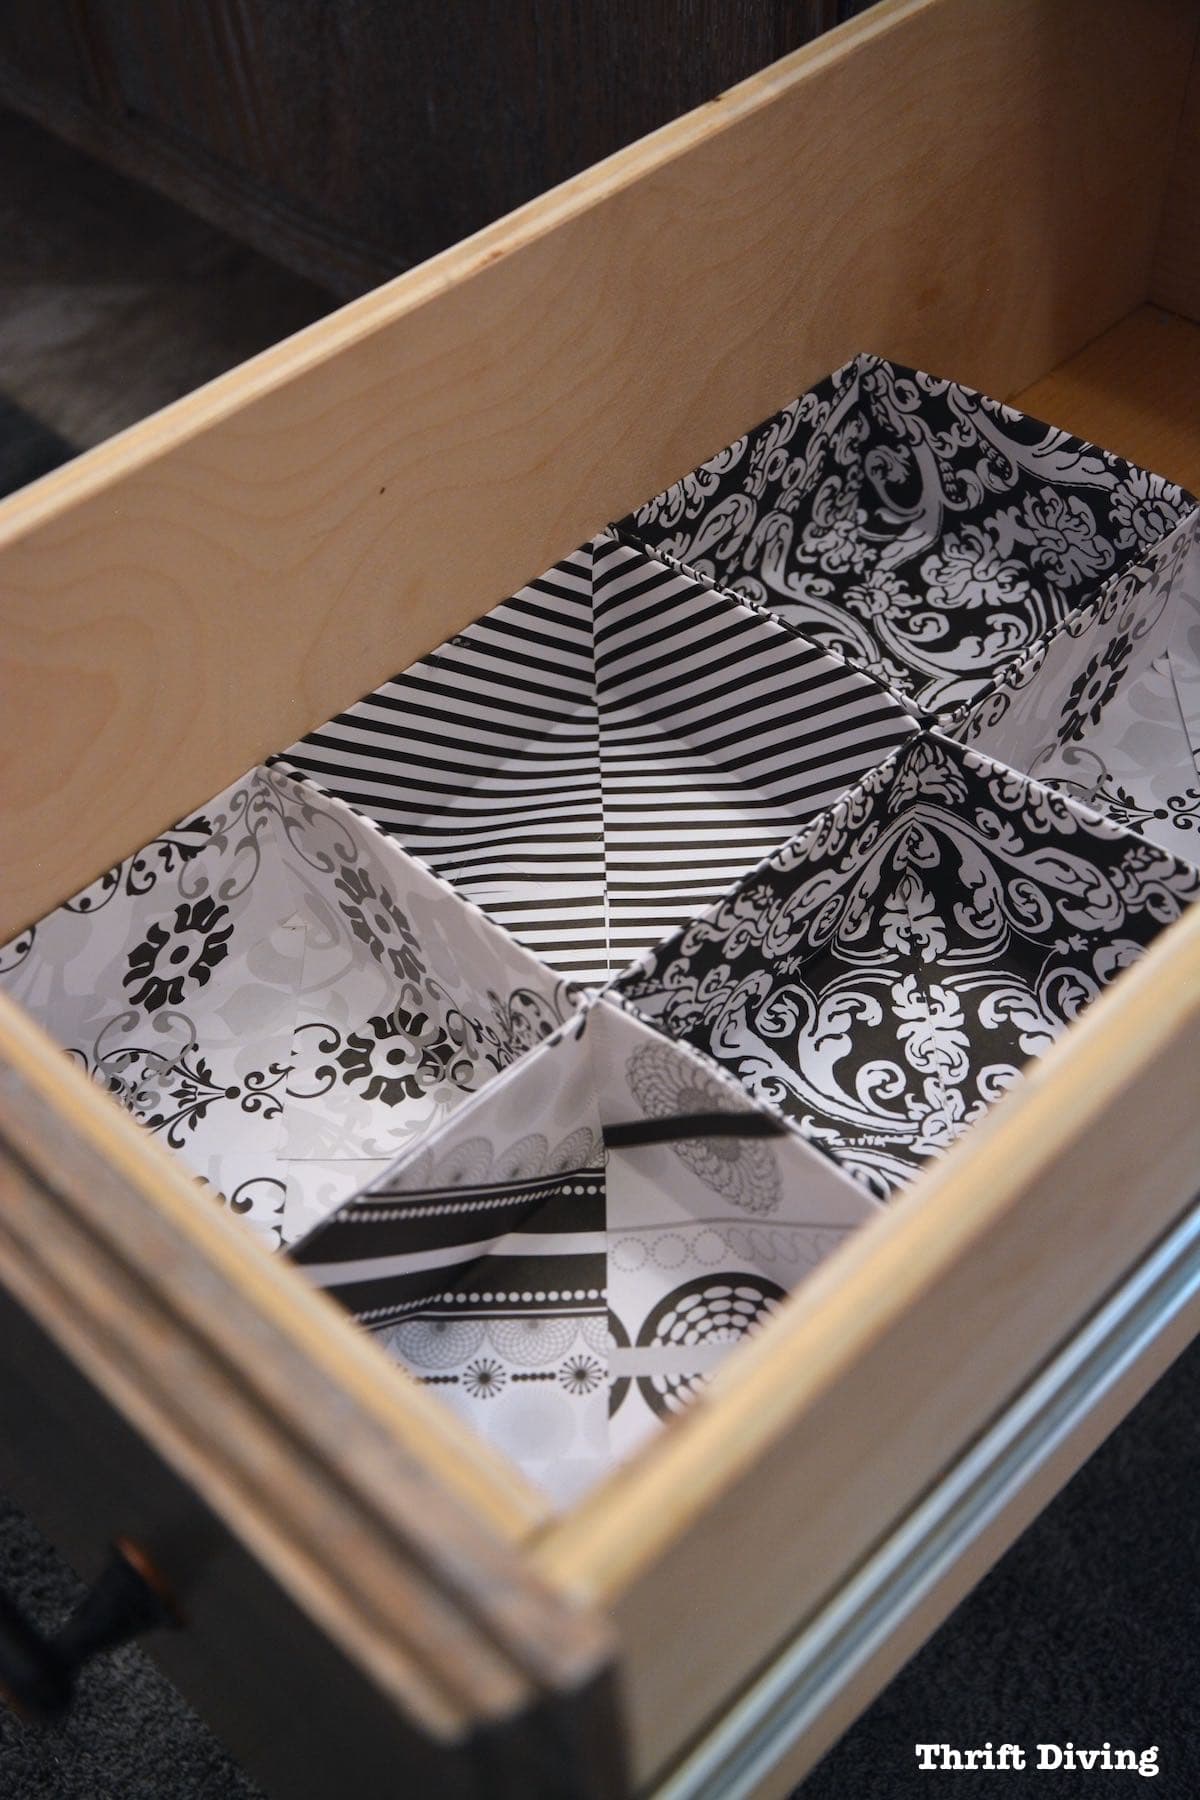 How To Make Diy Drawer Organizers With Always Discreet